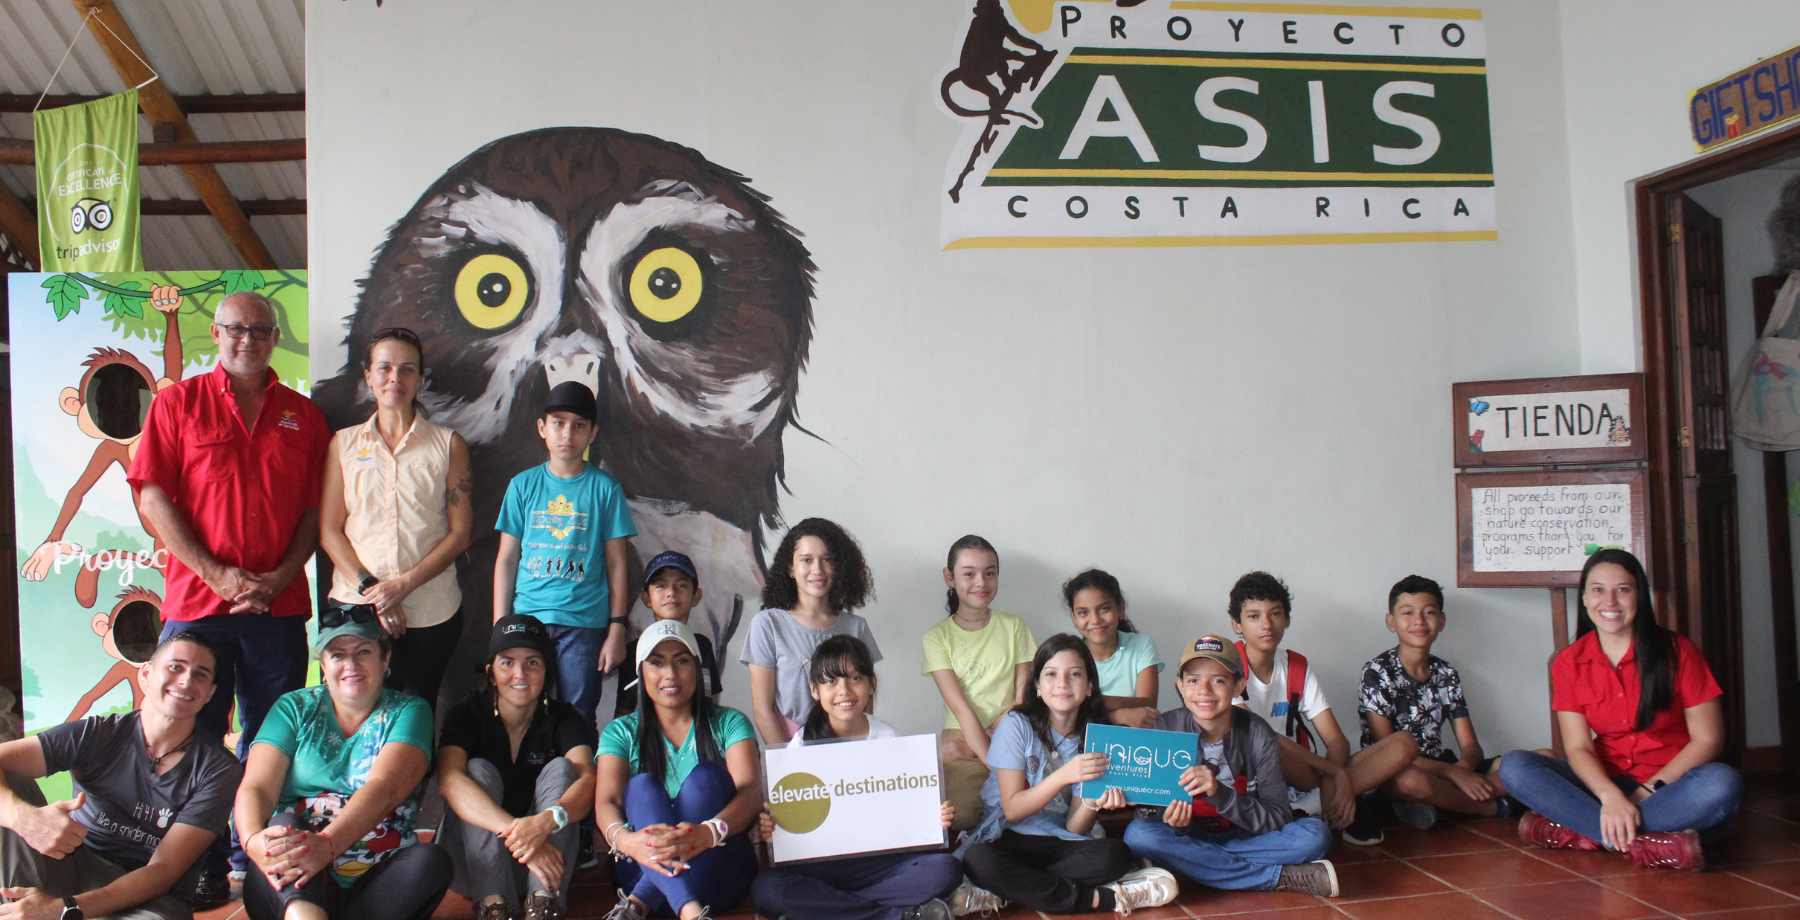 Group of students from El Cruce School in Costa Rica at Projecto Asis Wildlife Rescue Centre.